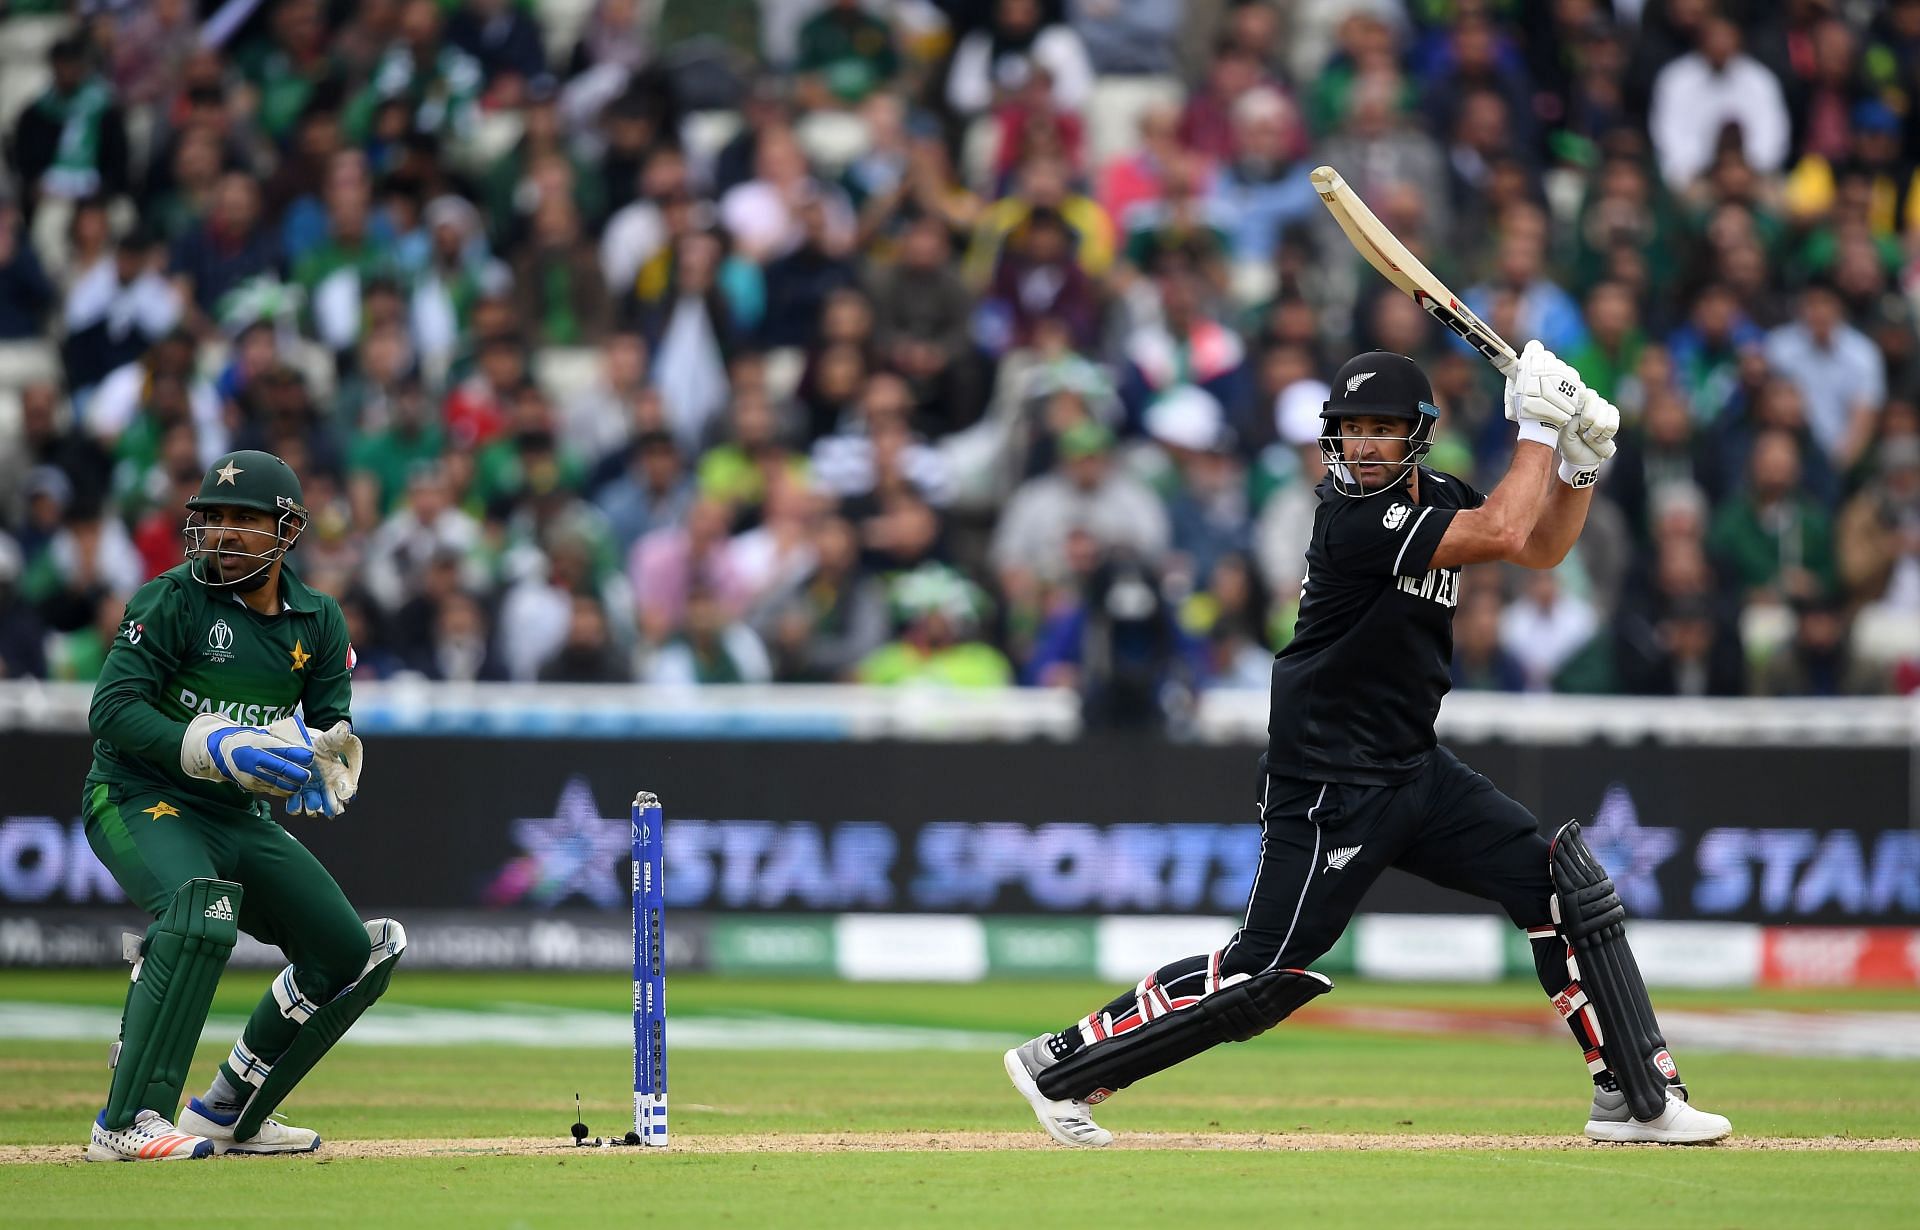 Colin de Grandhomme made some impressive contributions in the 2019 World Cup. (Pic: Getty Images)